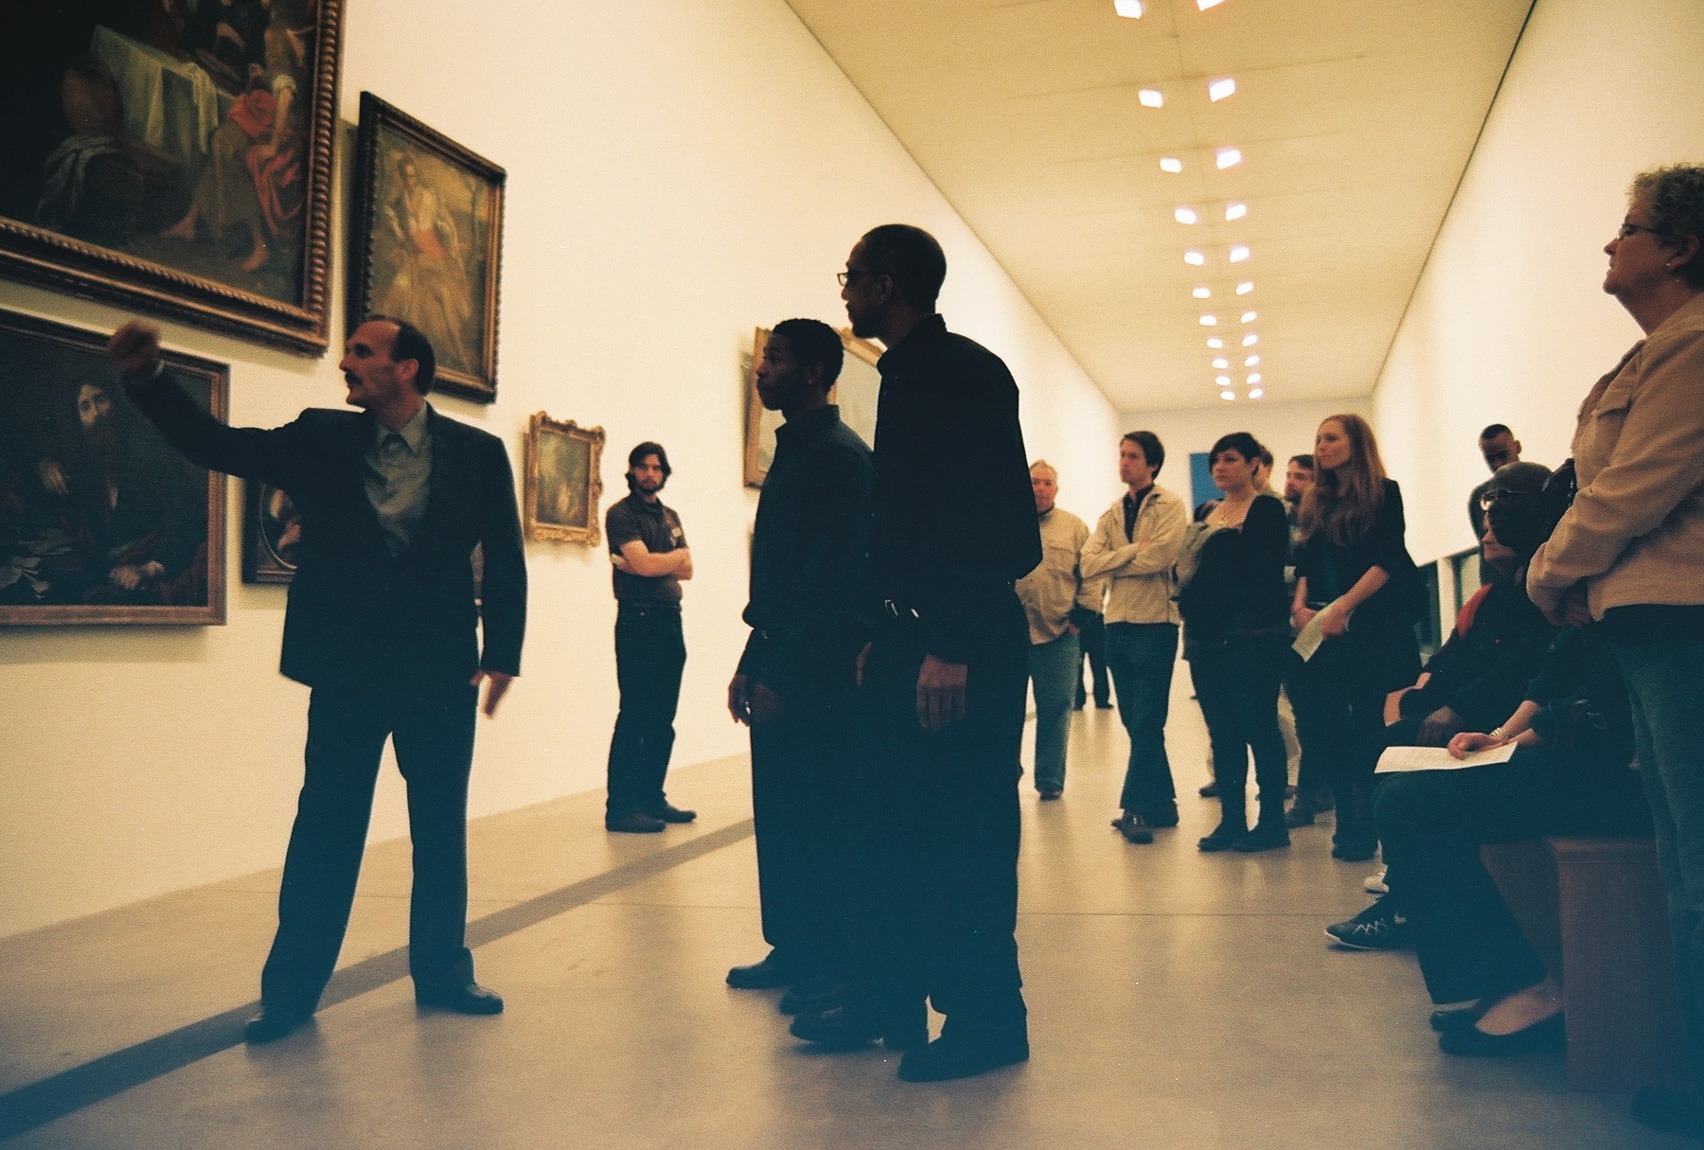 A tour guide discusses the paintings with a crowd of guests in the Main Gallery.